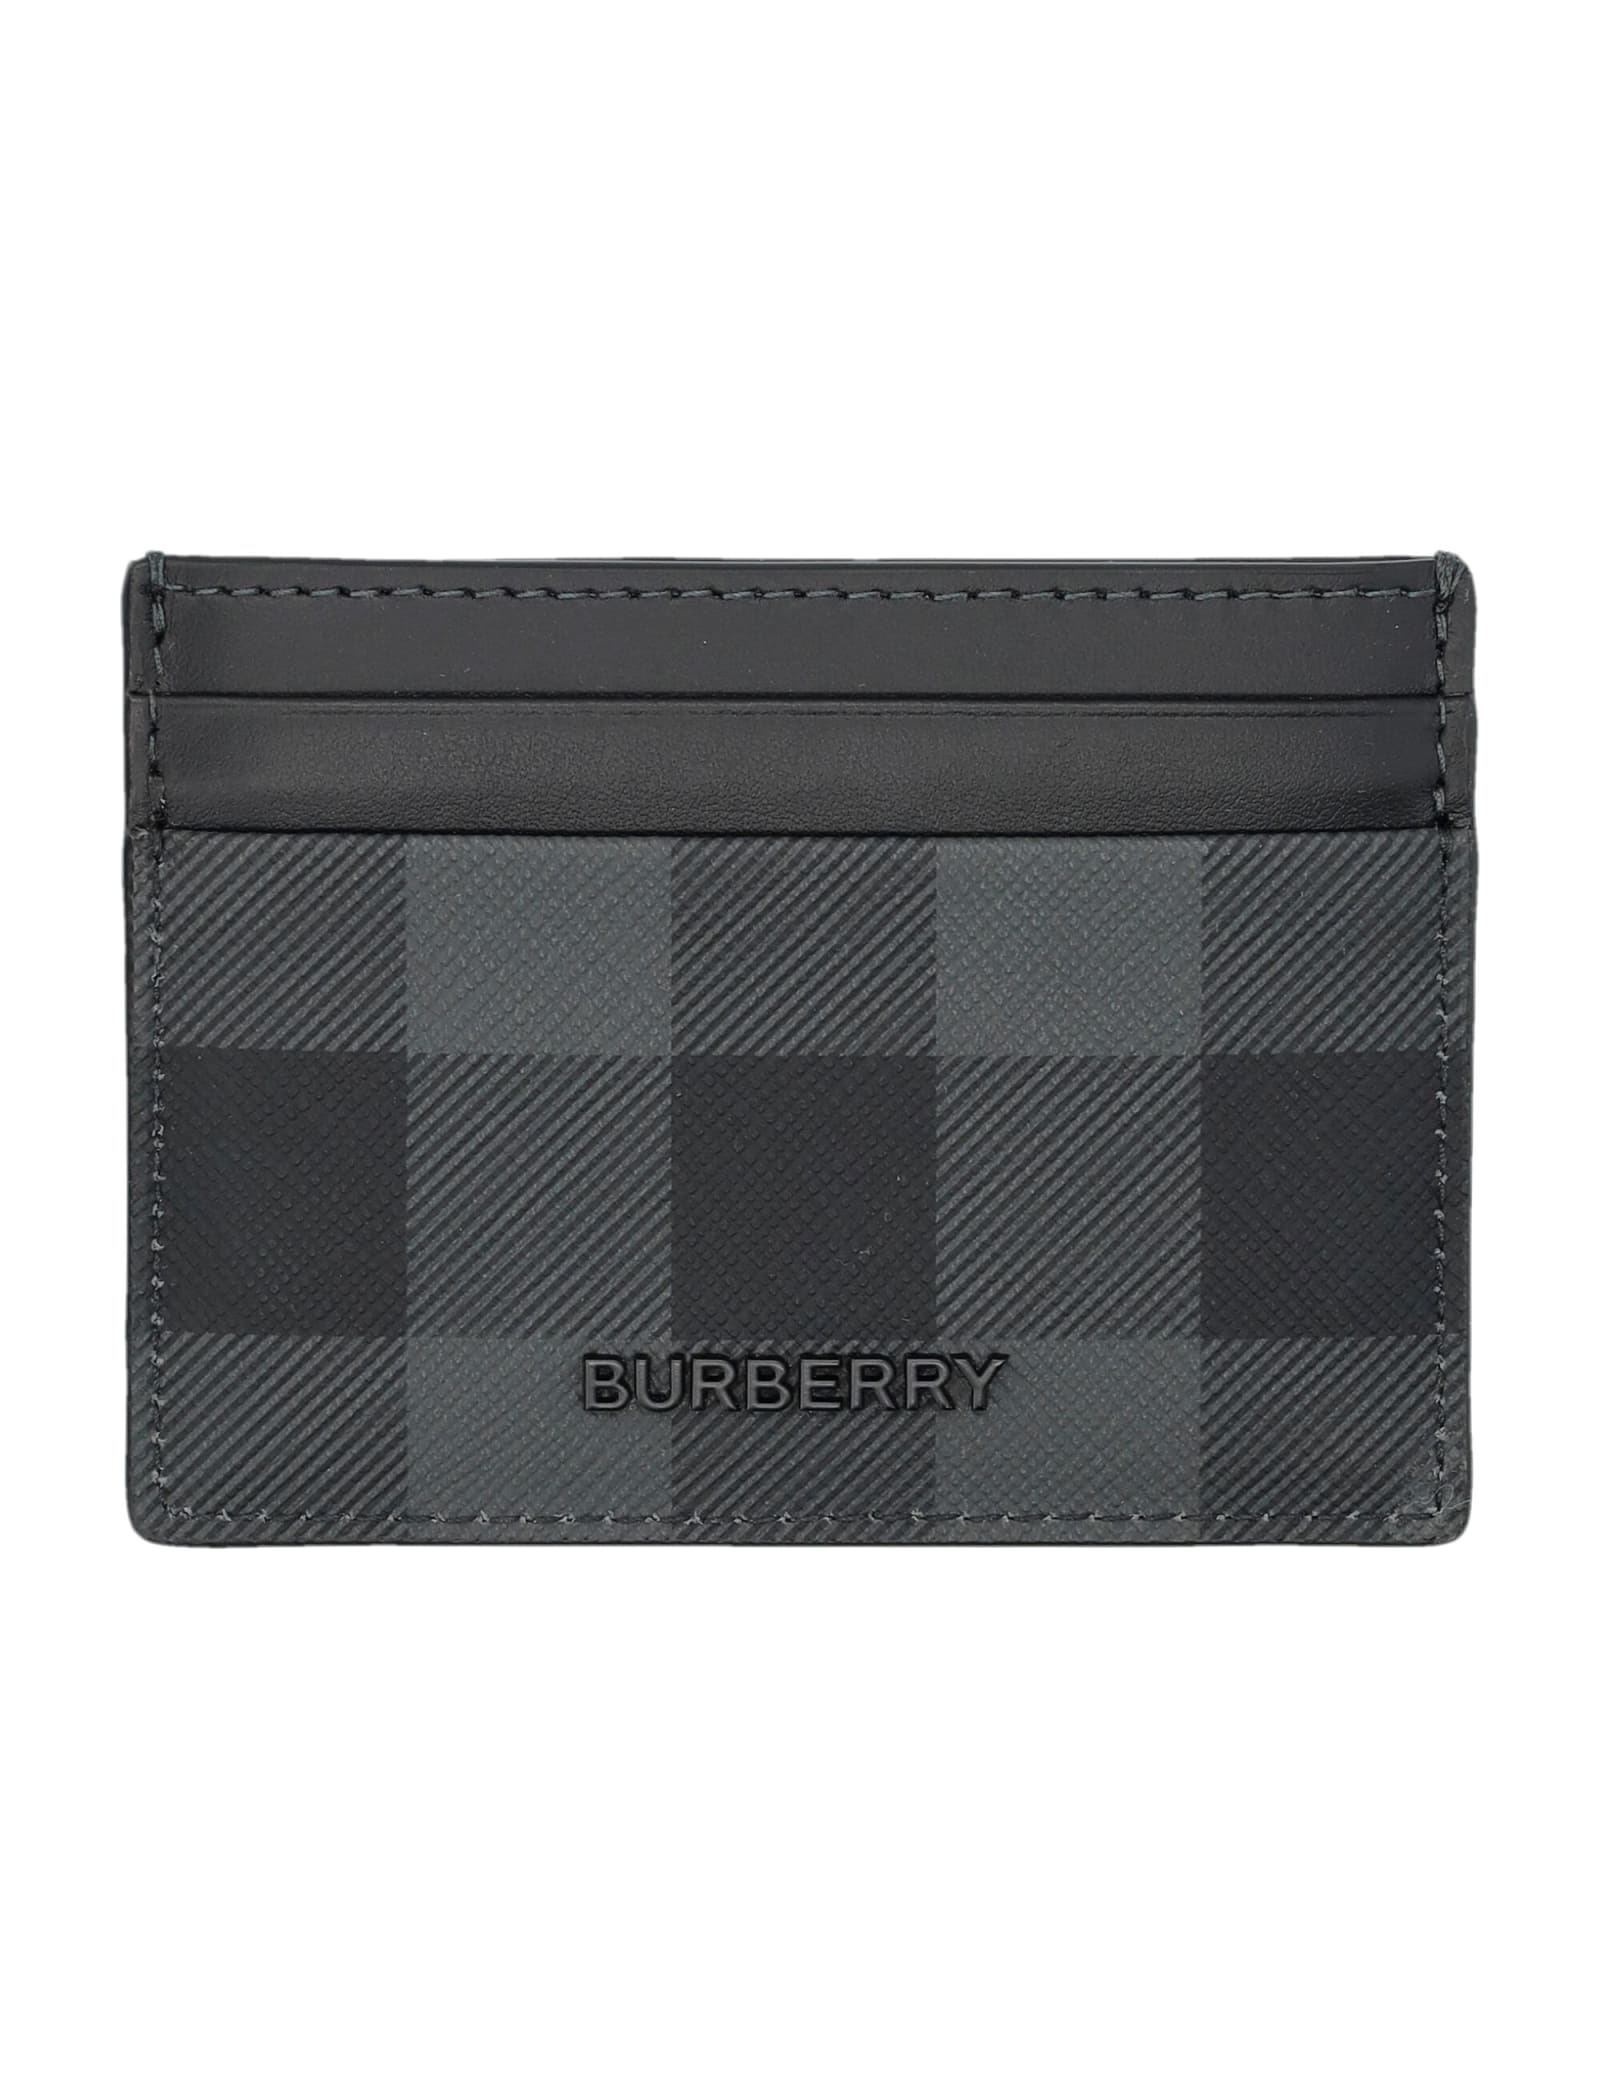 Burberry Check And Leather Card Case In Charcoal